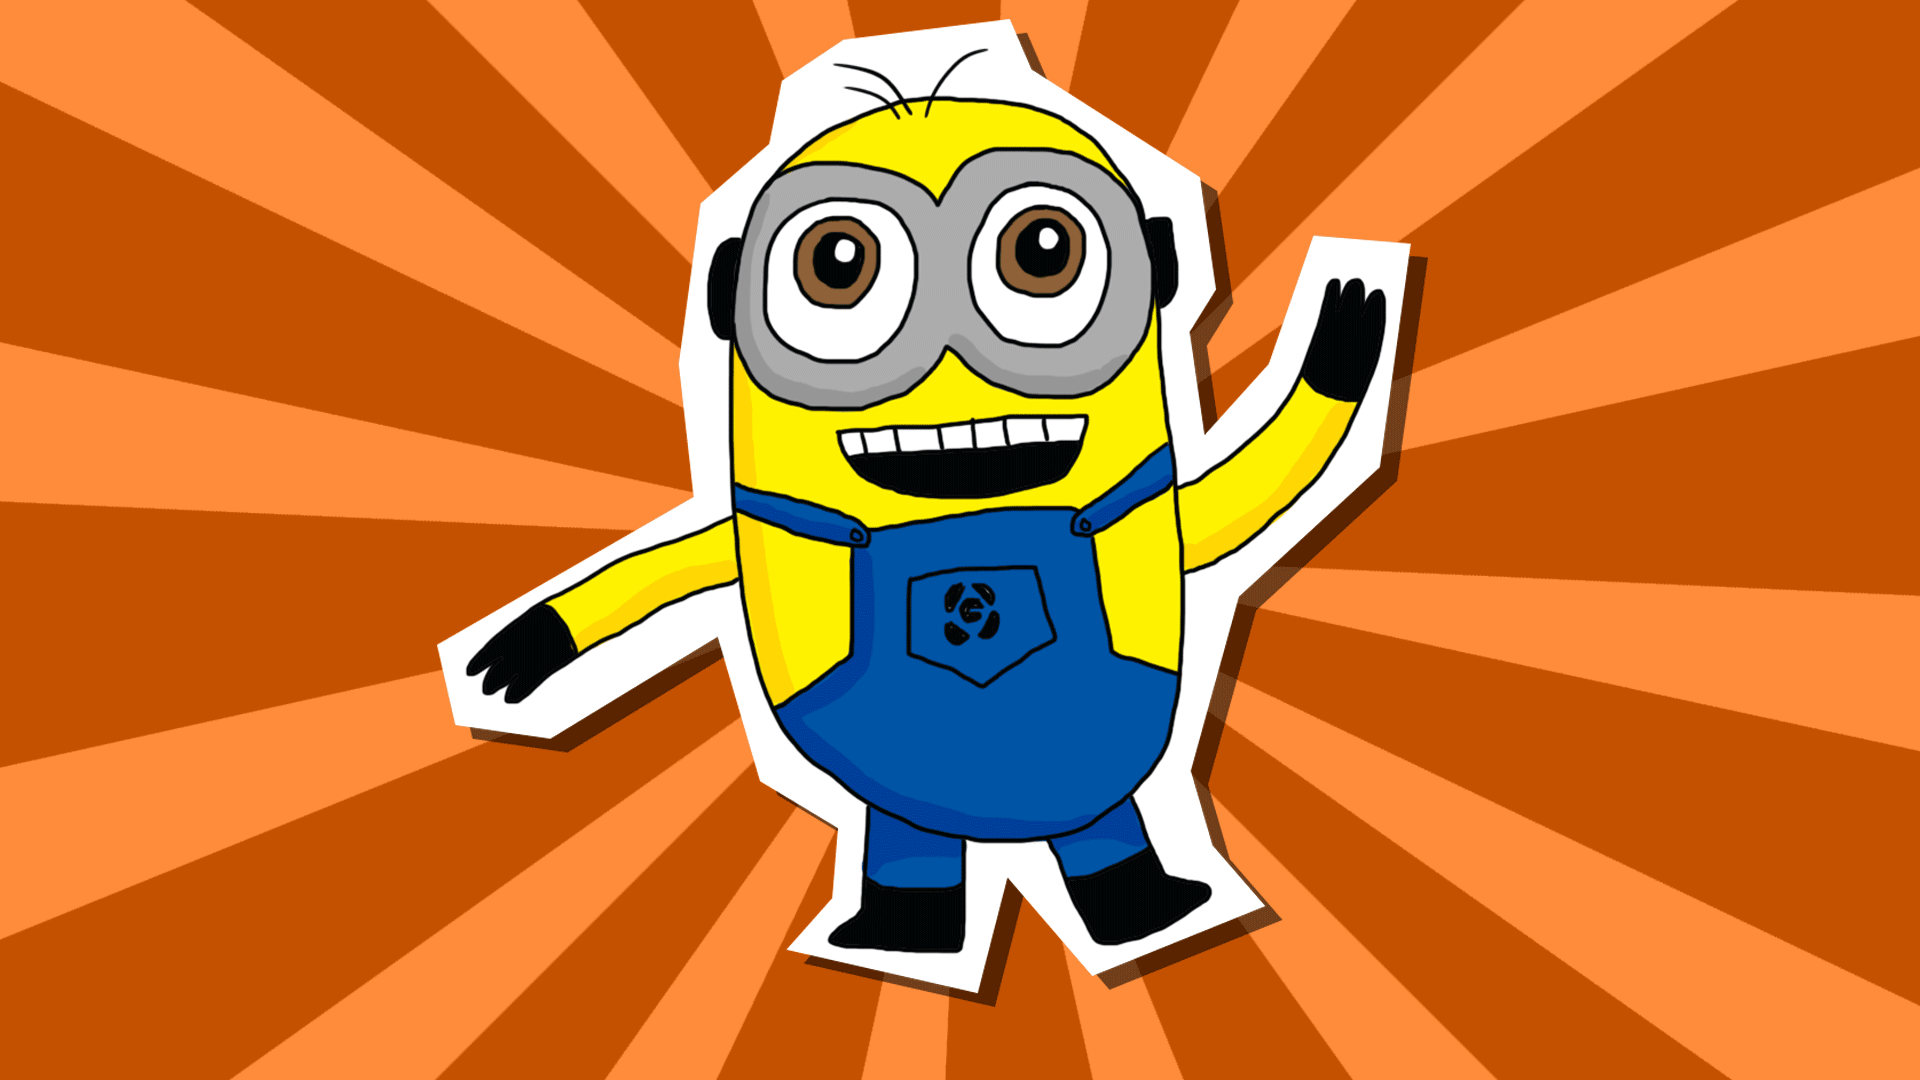 Minion Fan Art Drawing (Despicable Me) by LethalChris on DeviantArt